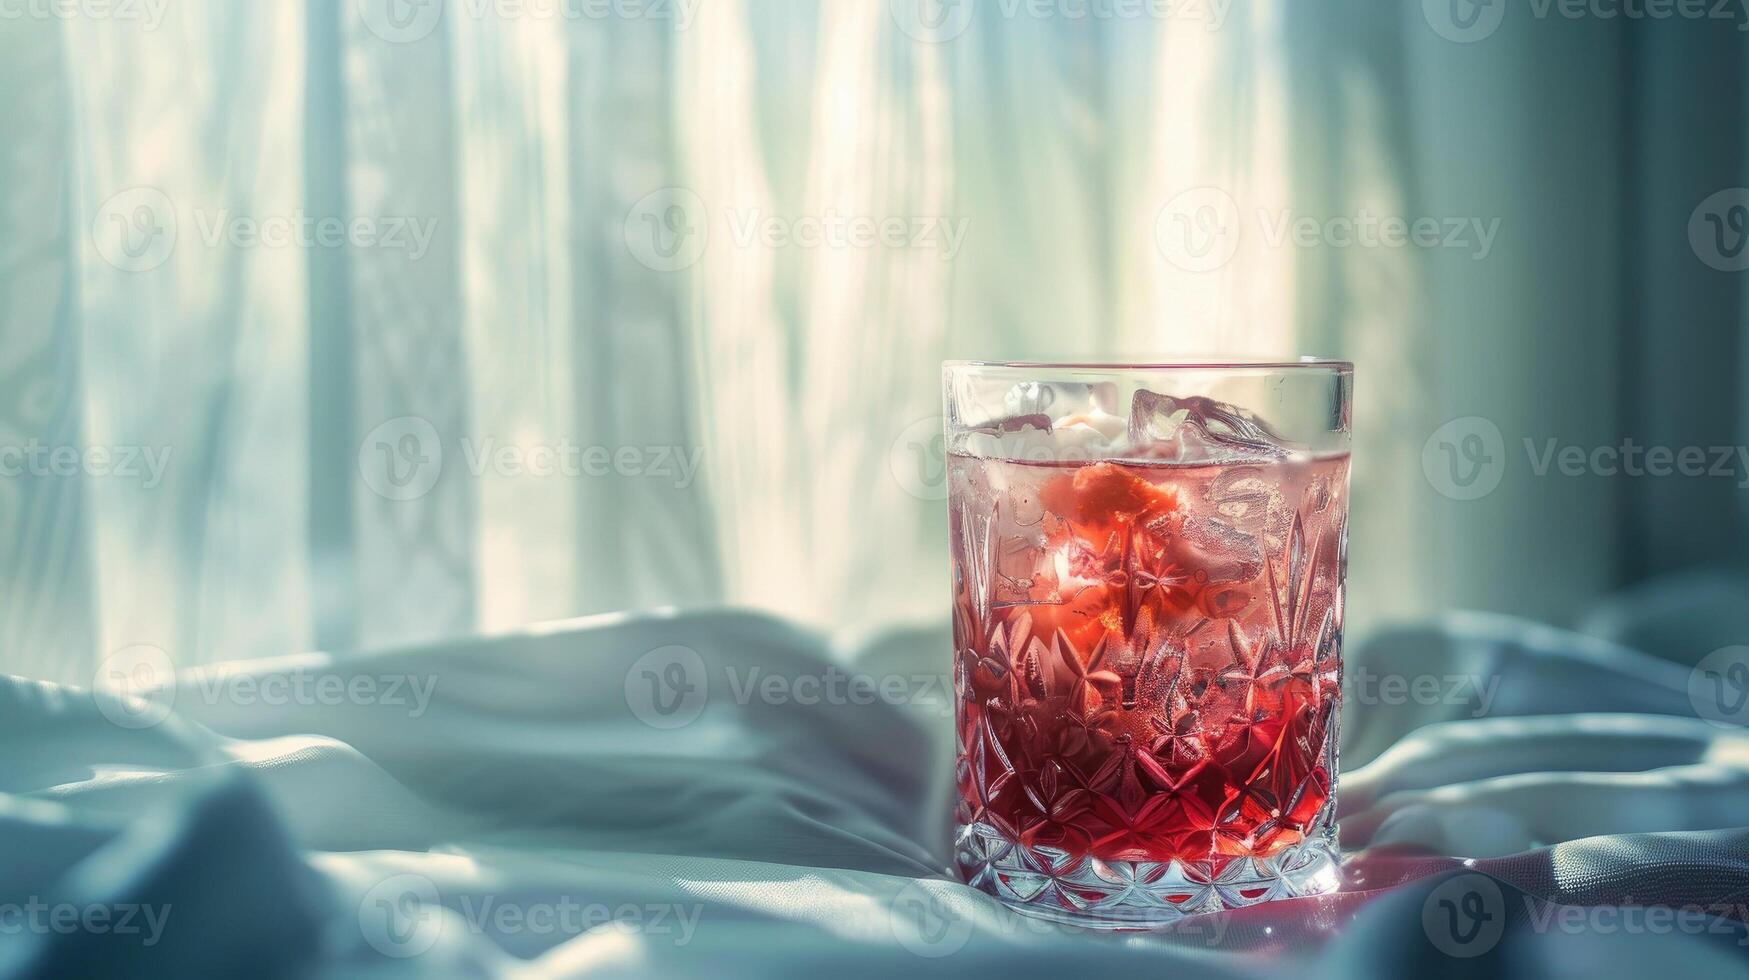 Glass of sleepy girl mocktail, drink made from cherry juice, magnesium powder and non alcoholic soda. Quiet luxury interior, backdrop of curtain, soft light, blurred background photo